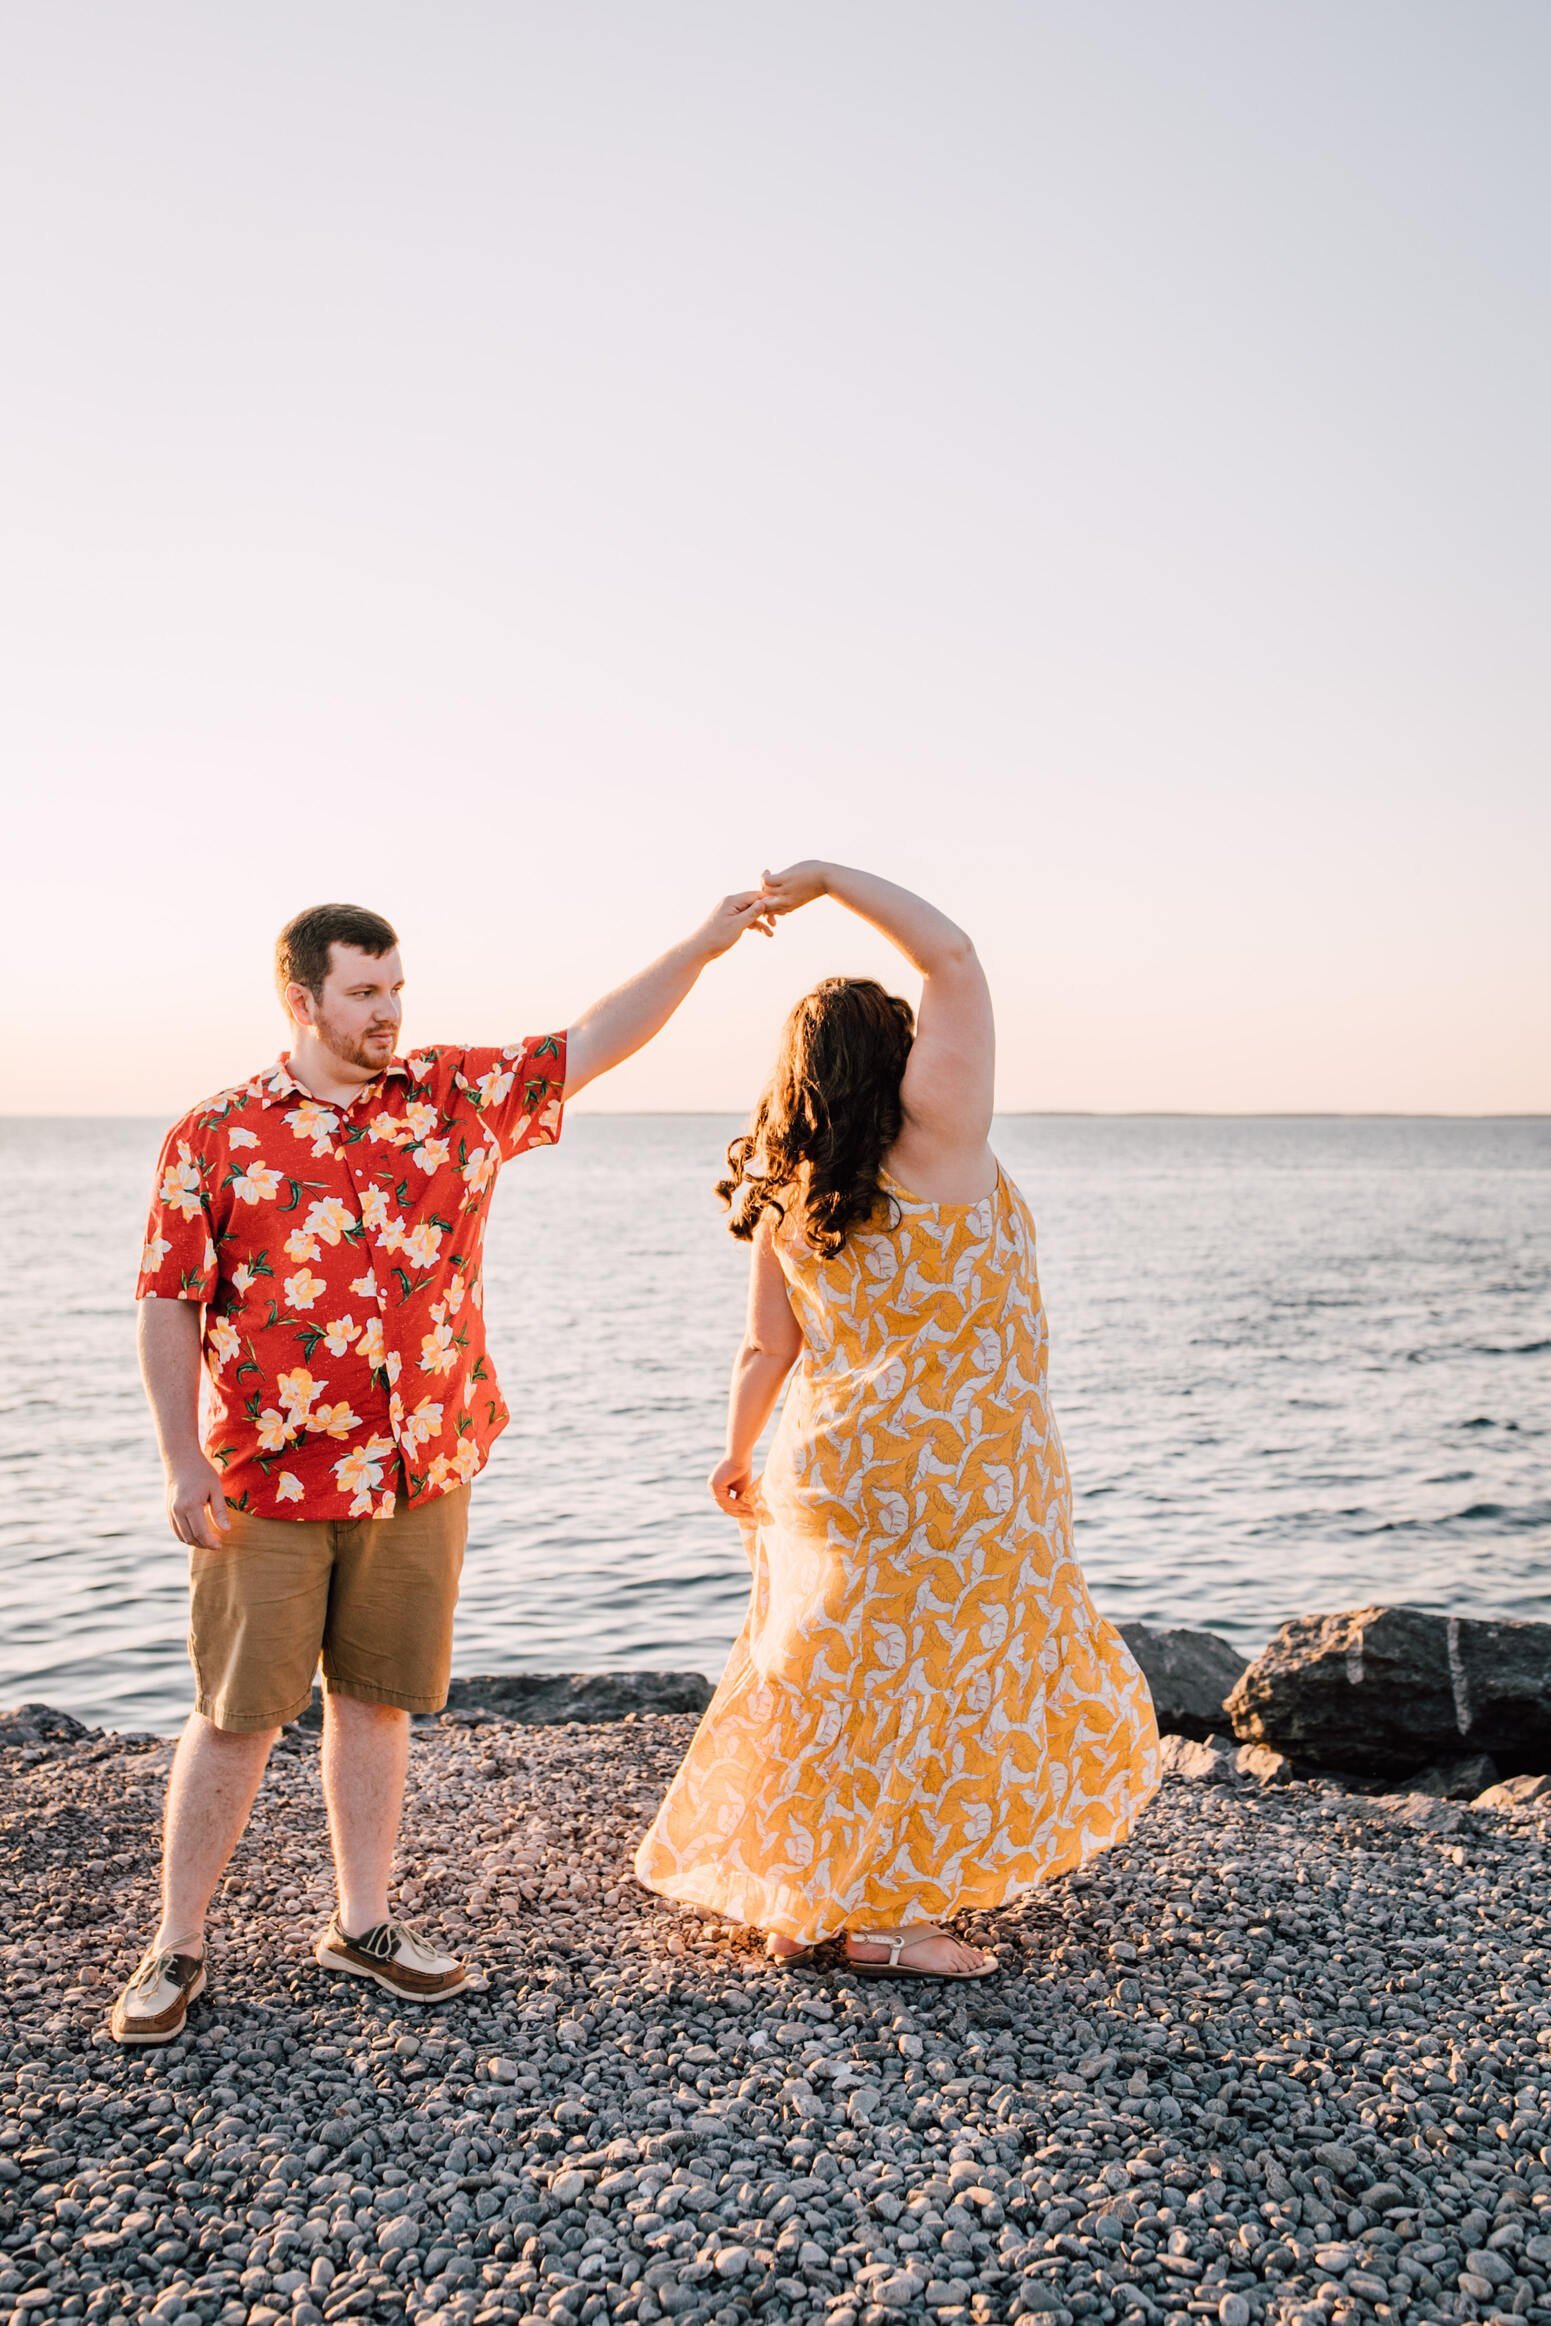  Brandon spins his fiancé as they dance on a rocky beach on the shore of Lake Ontario for their lake engagement photos 